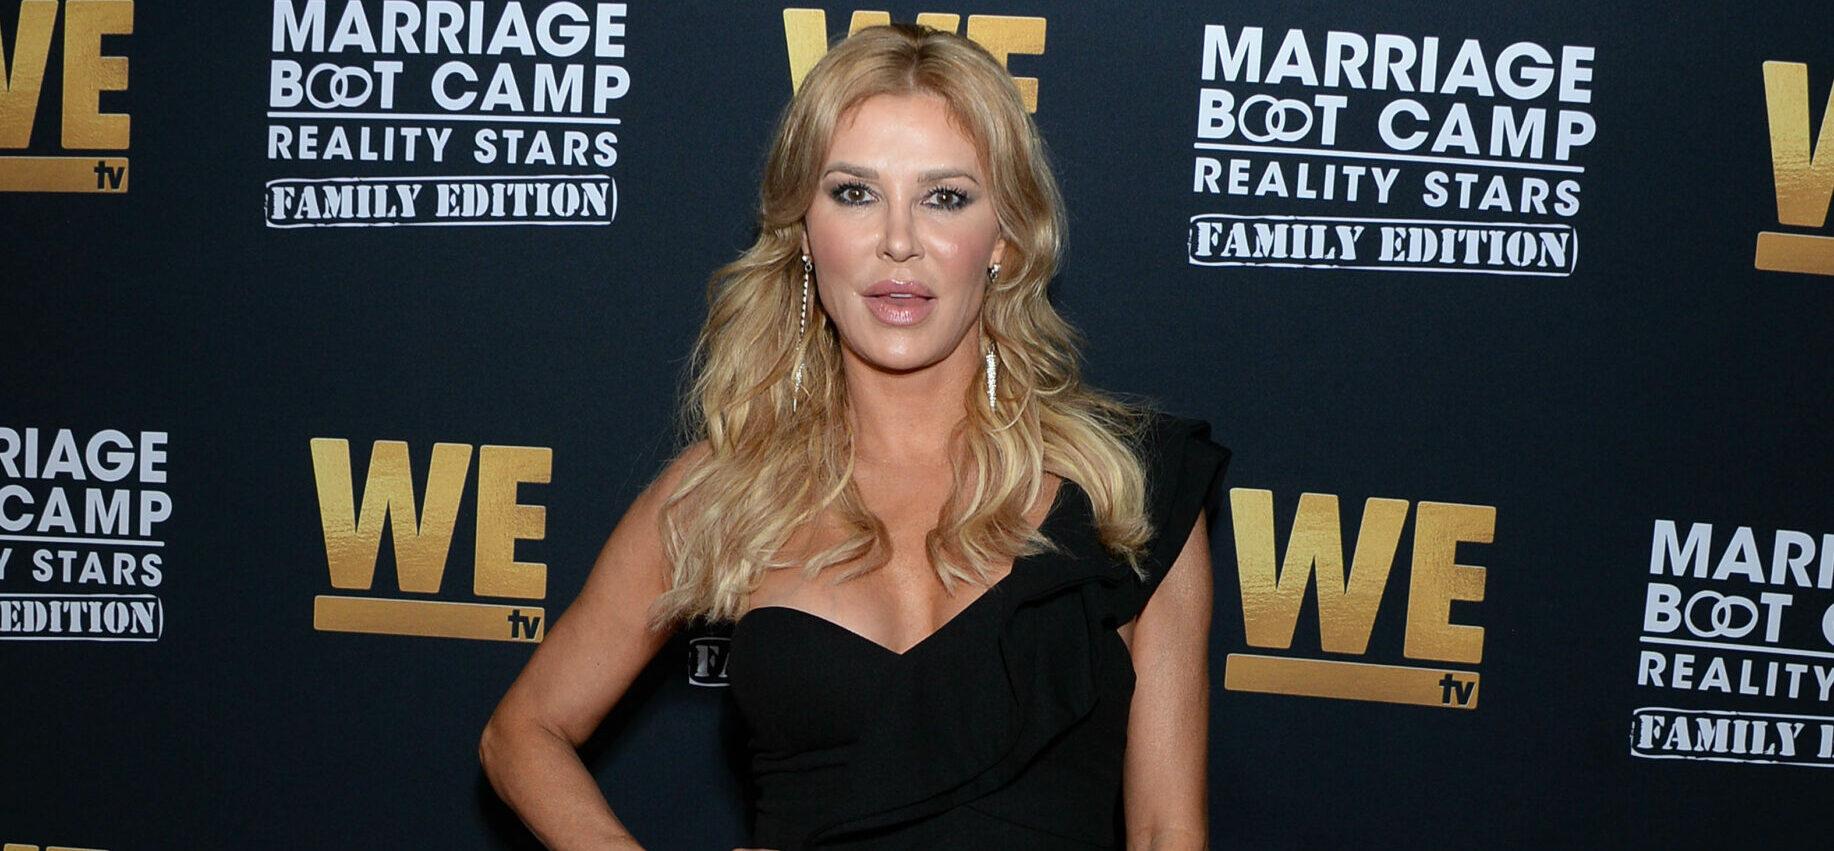 Brandi Glanville Says Joining This Site ‘Saved’ Her Life Financially